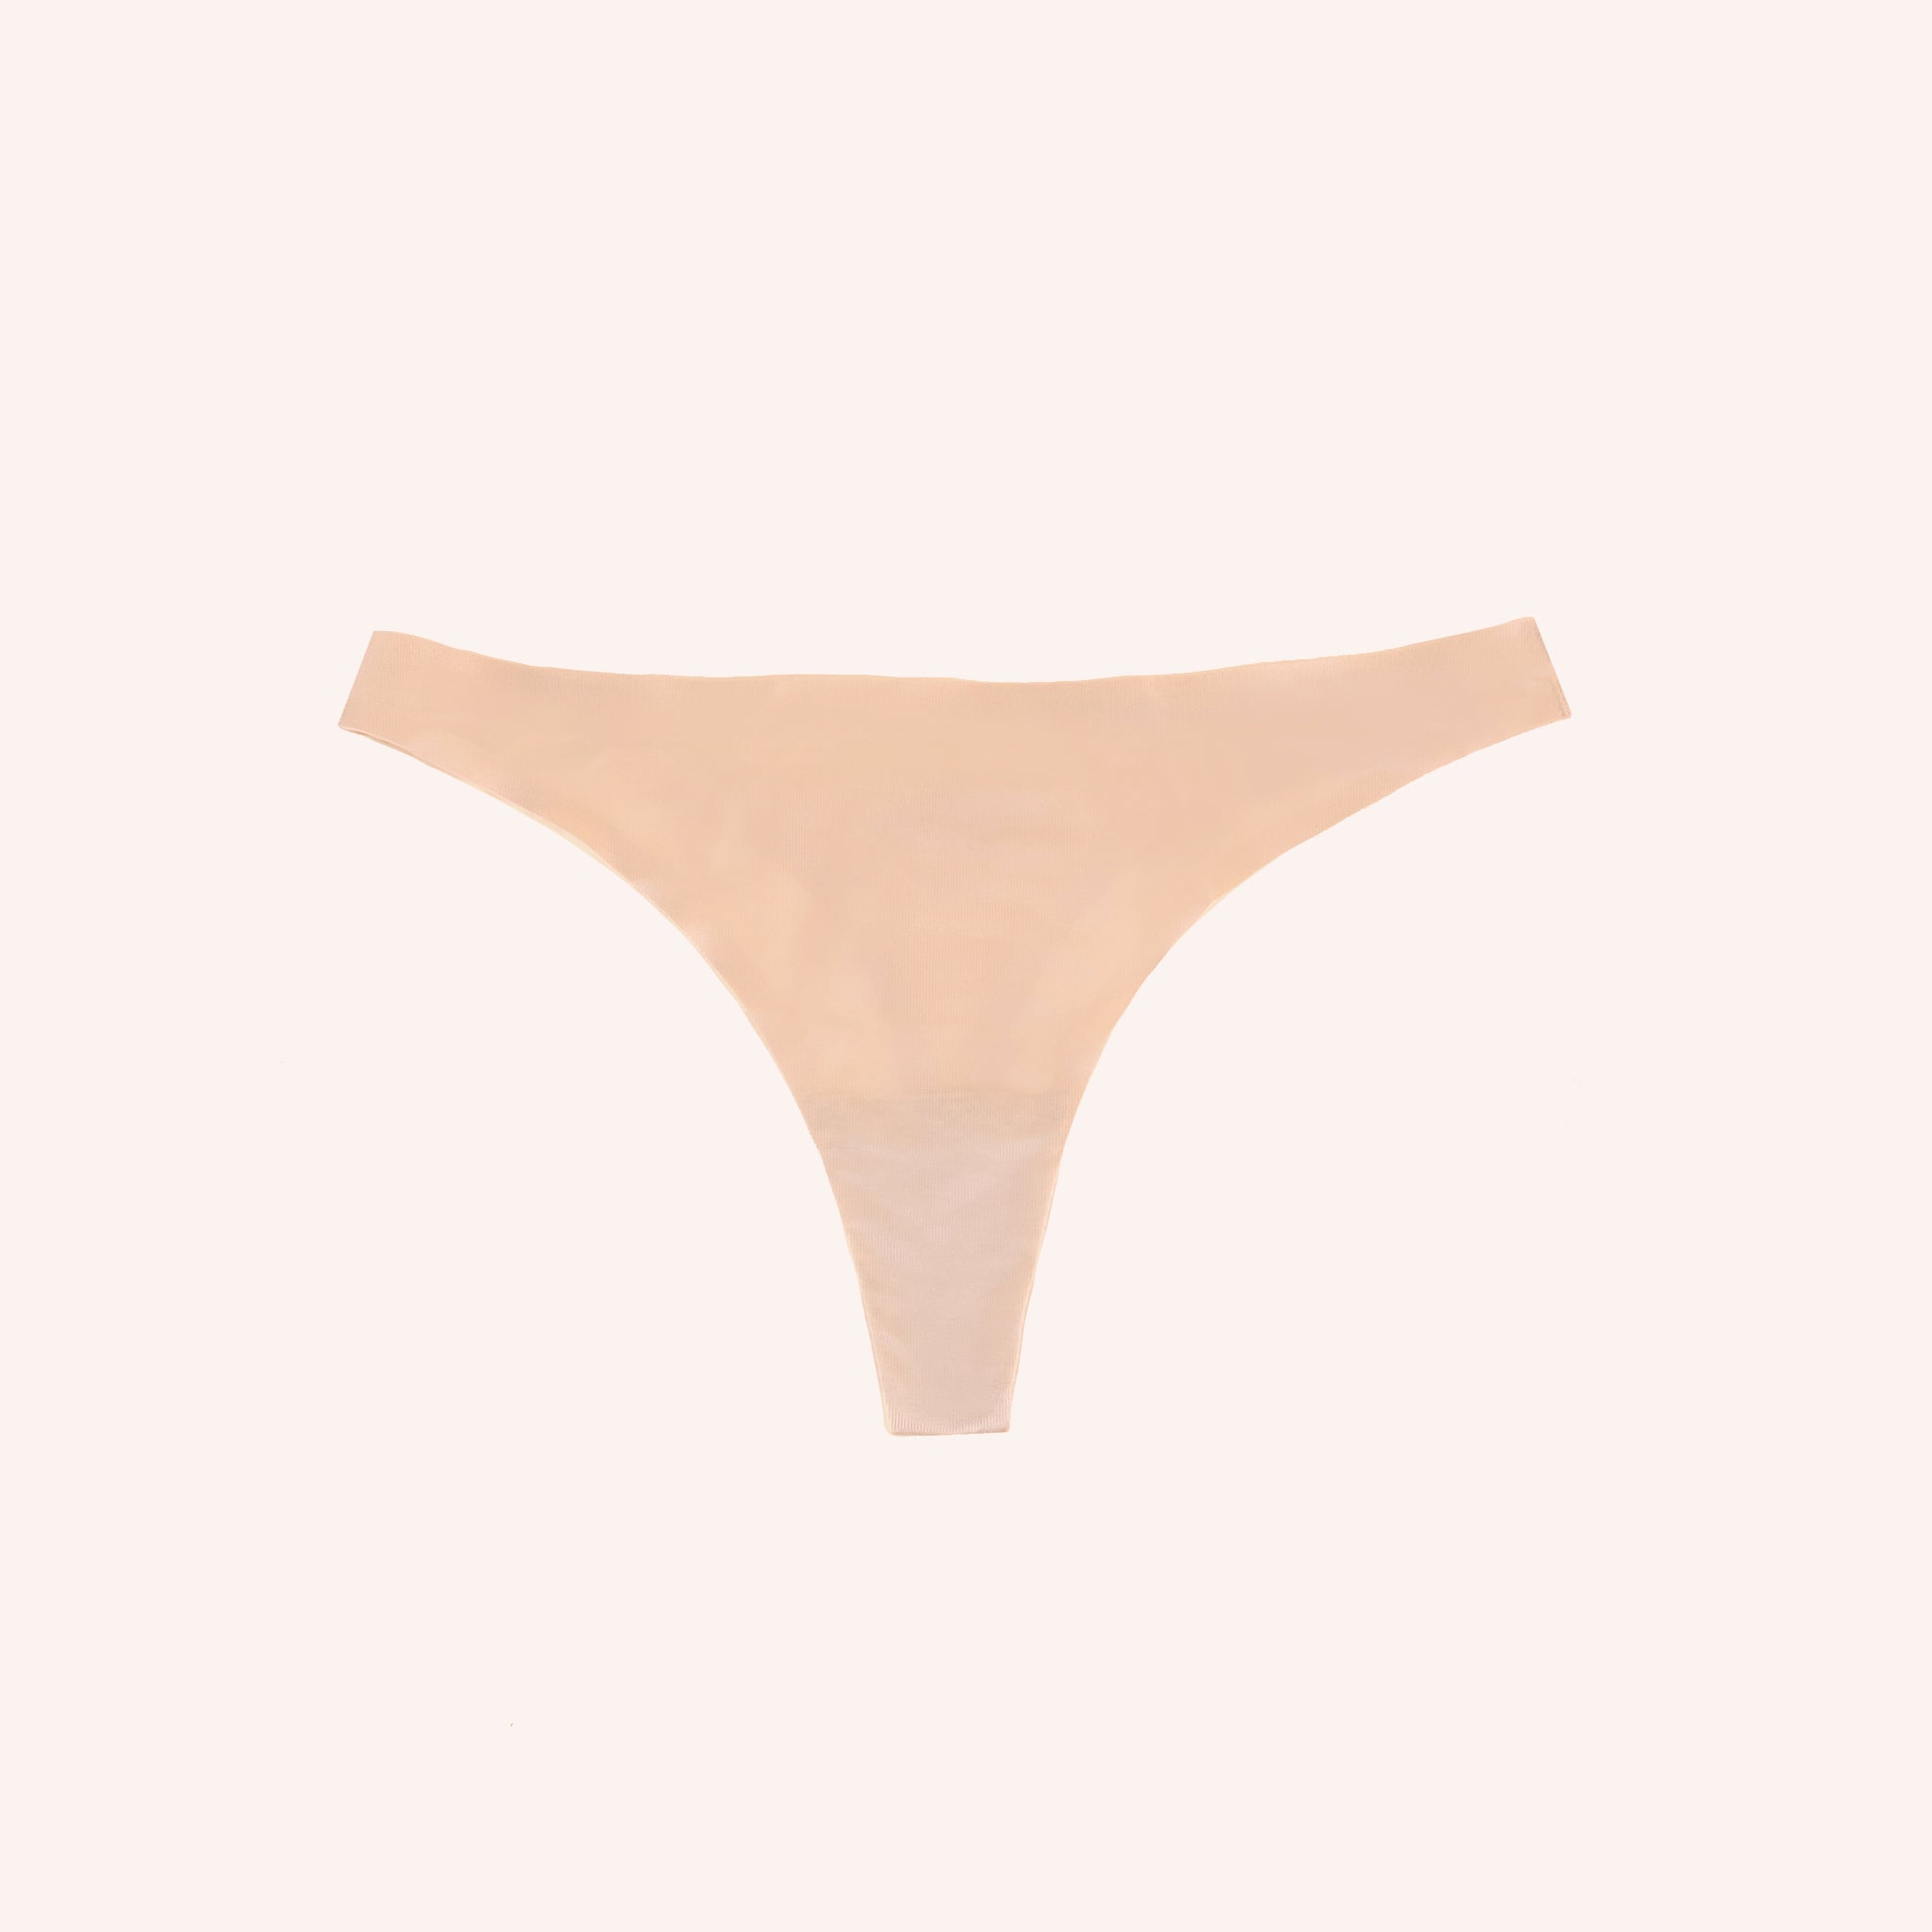 Thong Underwear in Taupe, front view